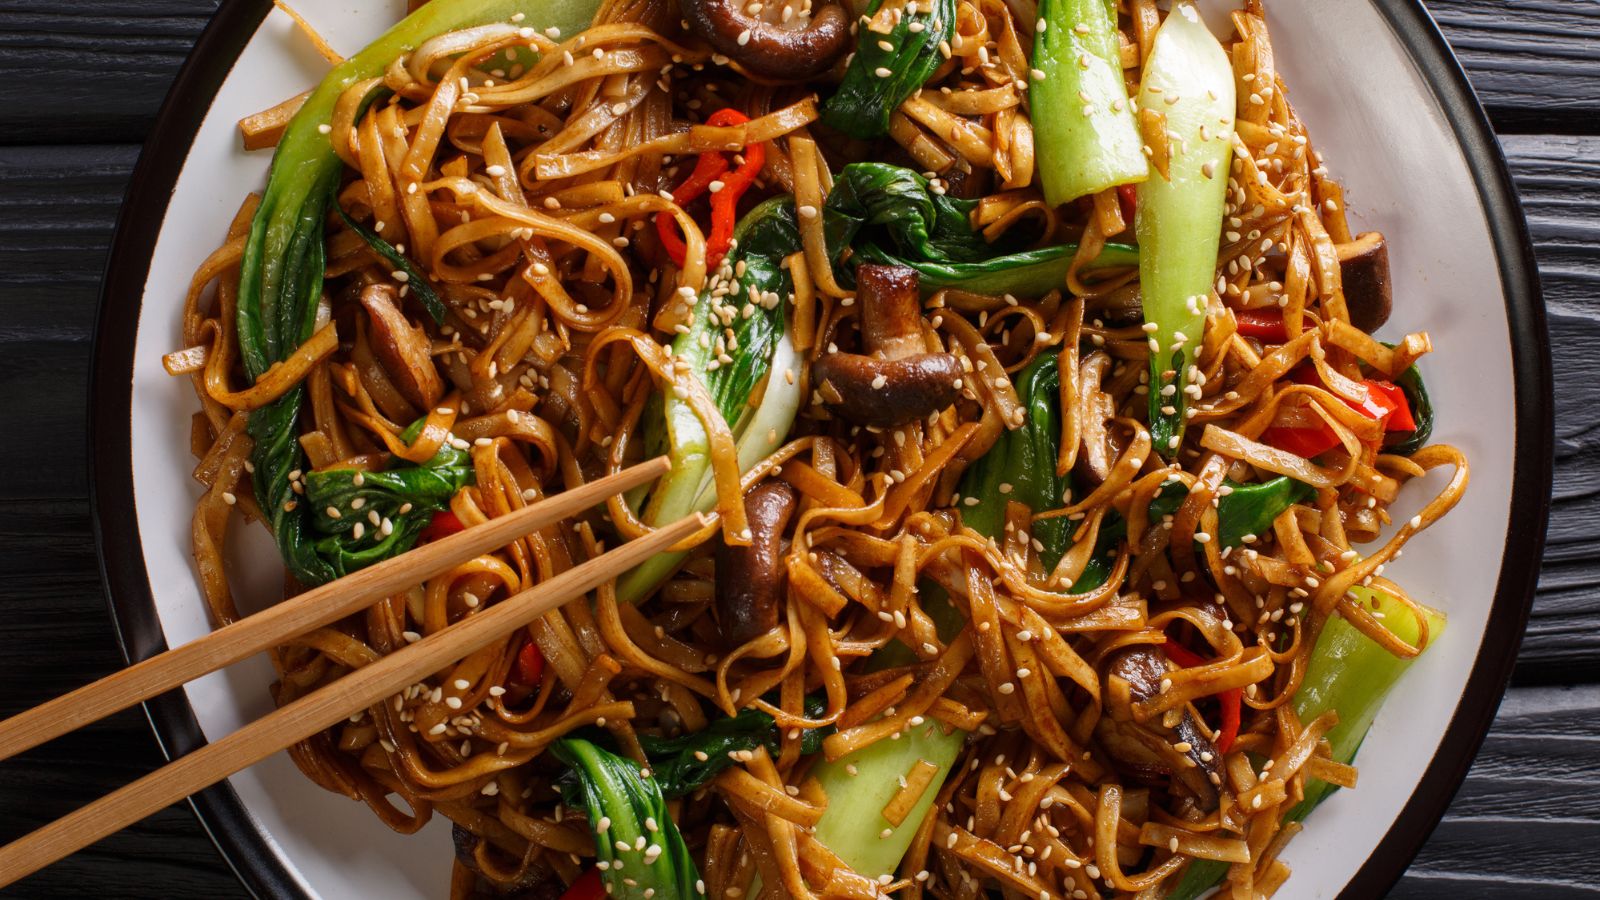 18 Easy Wok Recipes for Lightning-Fast Delicious Meals